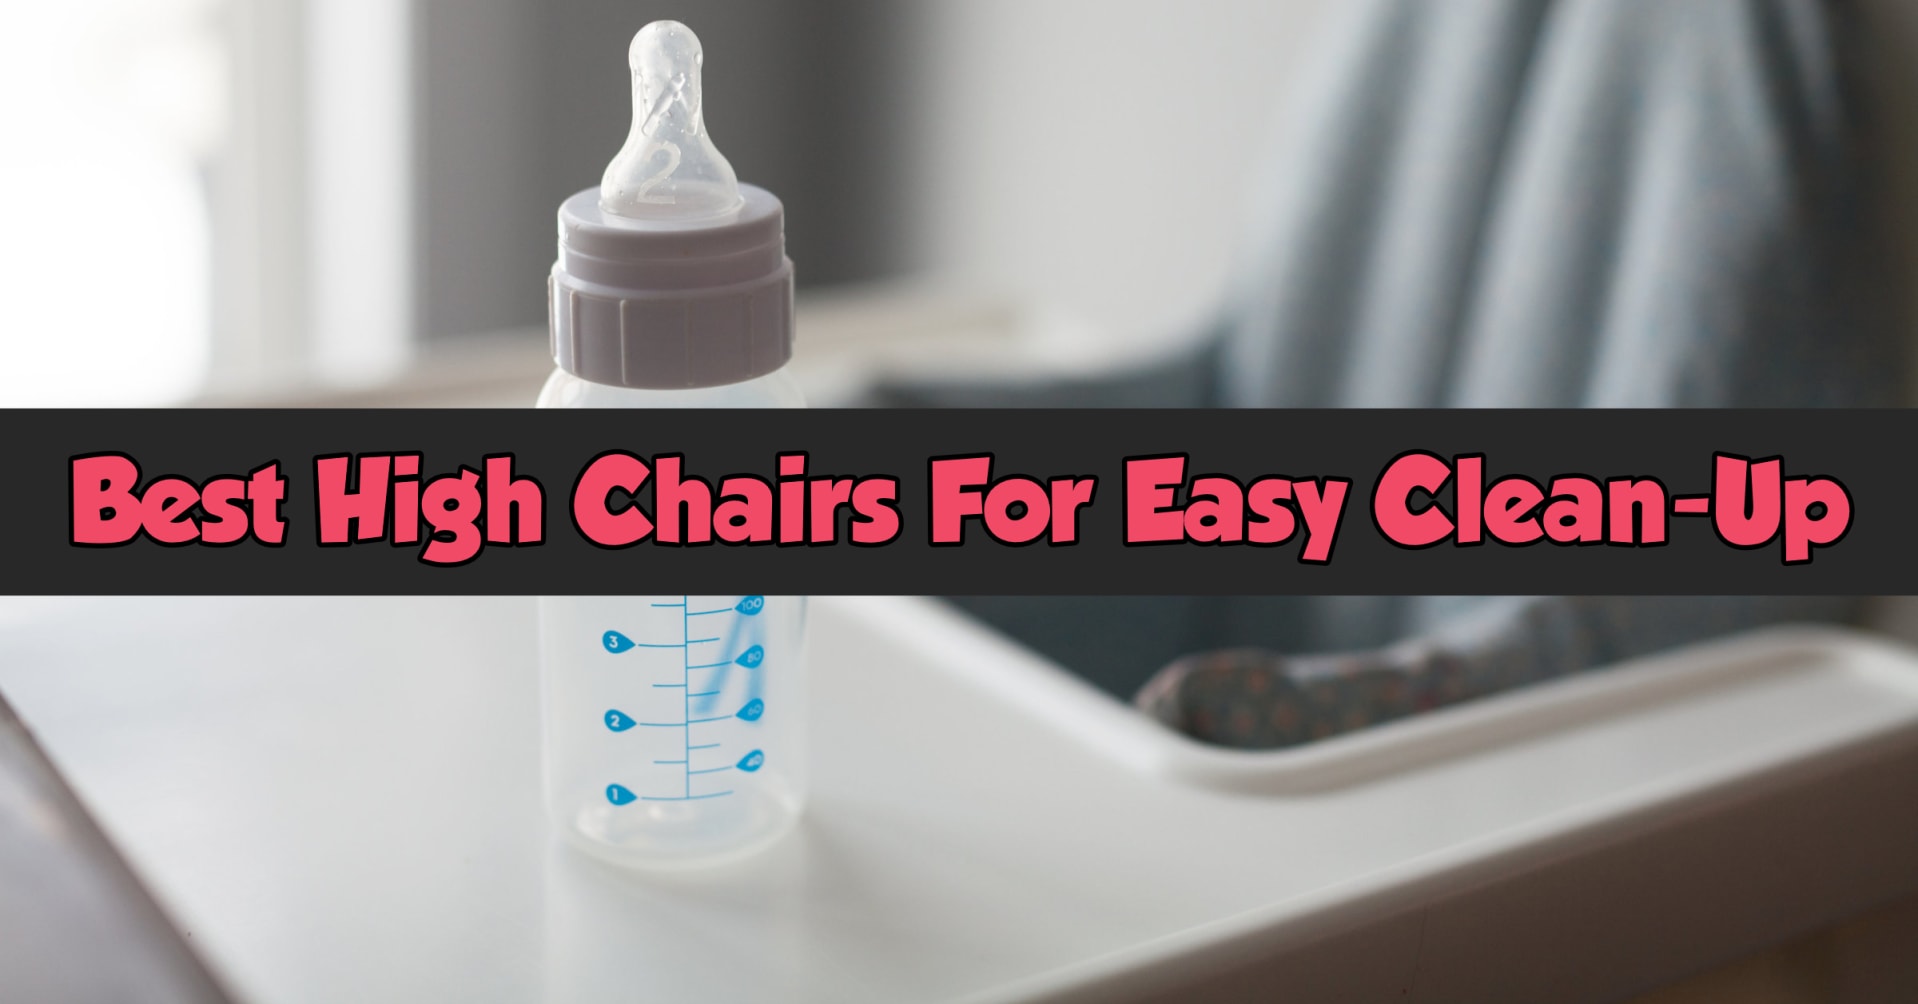 Highchairs that are easy to clean - best high chair for easy cleanup